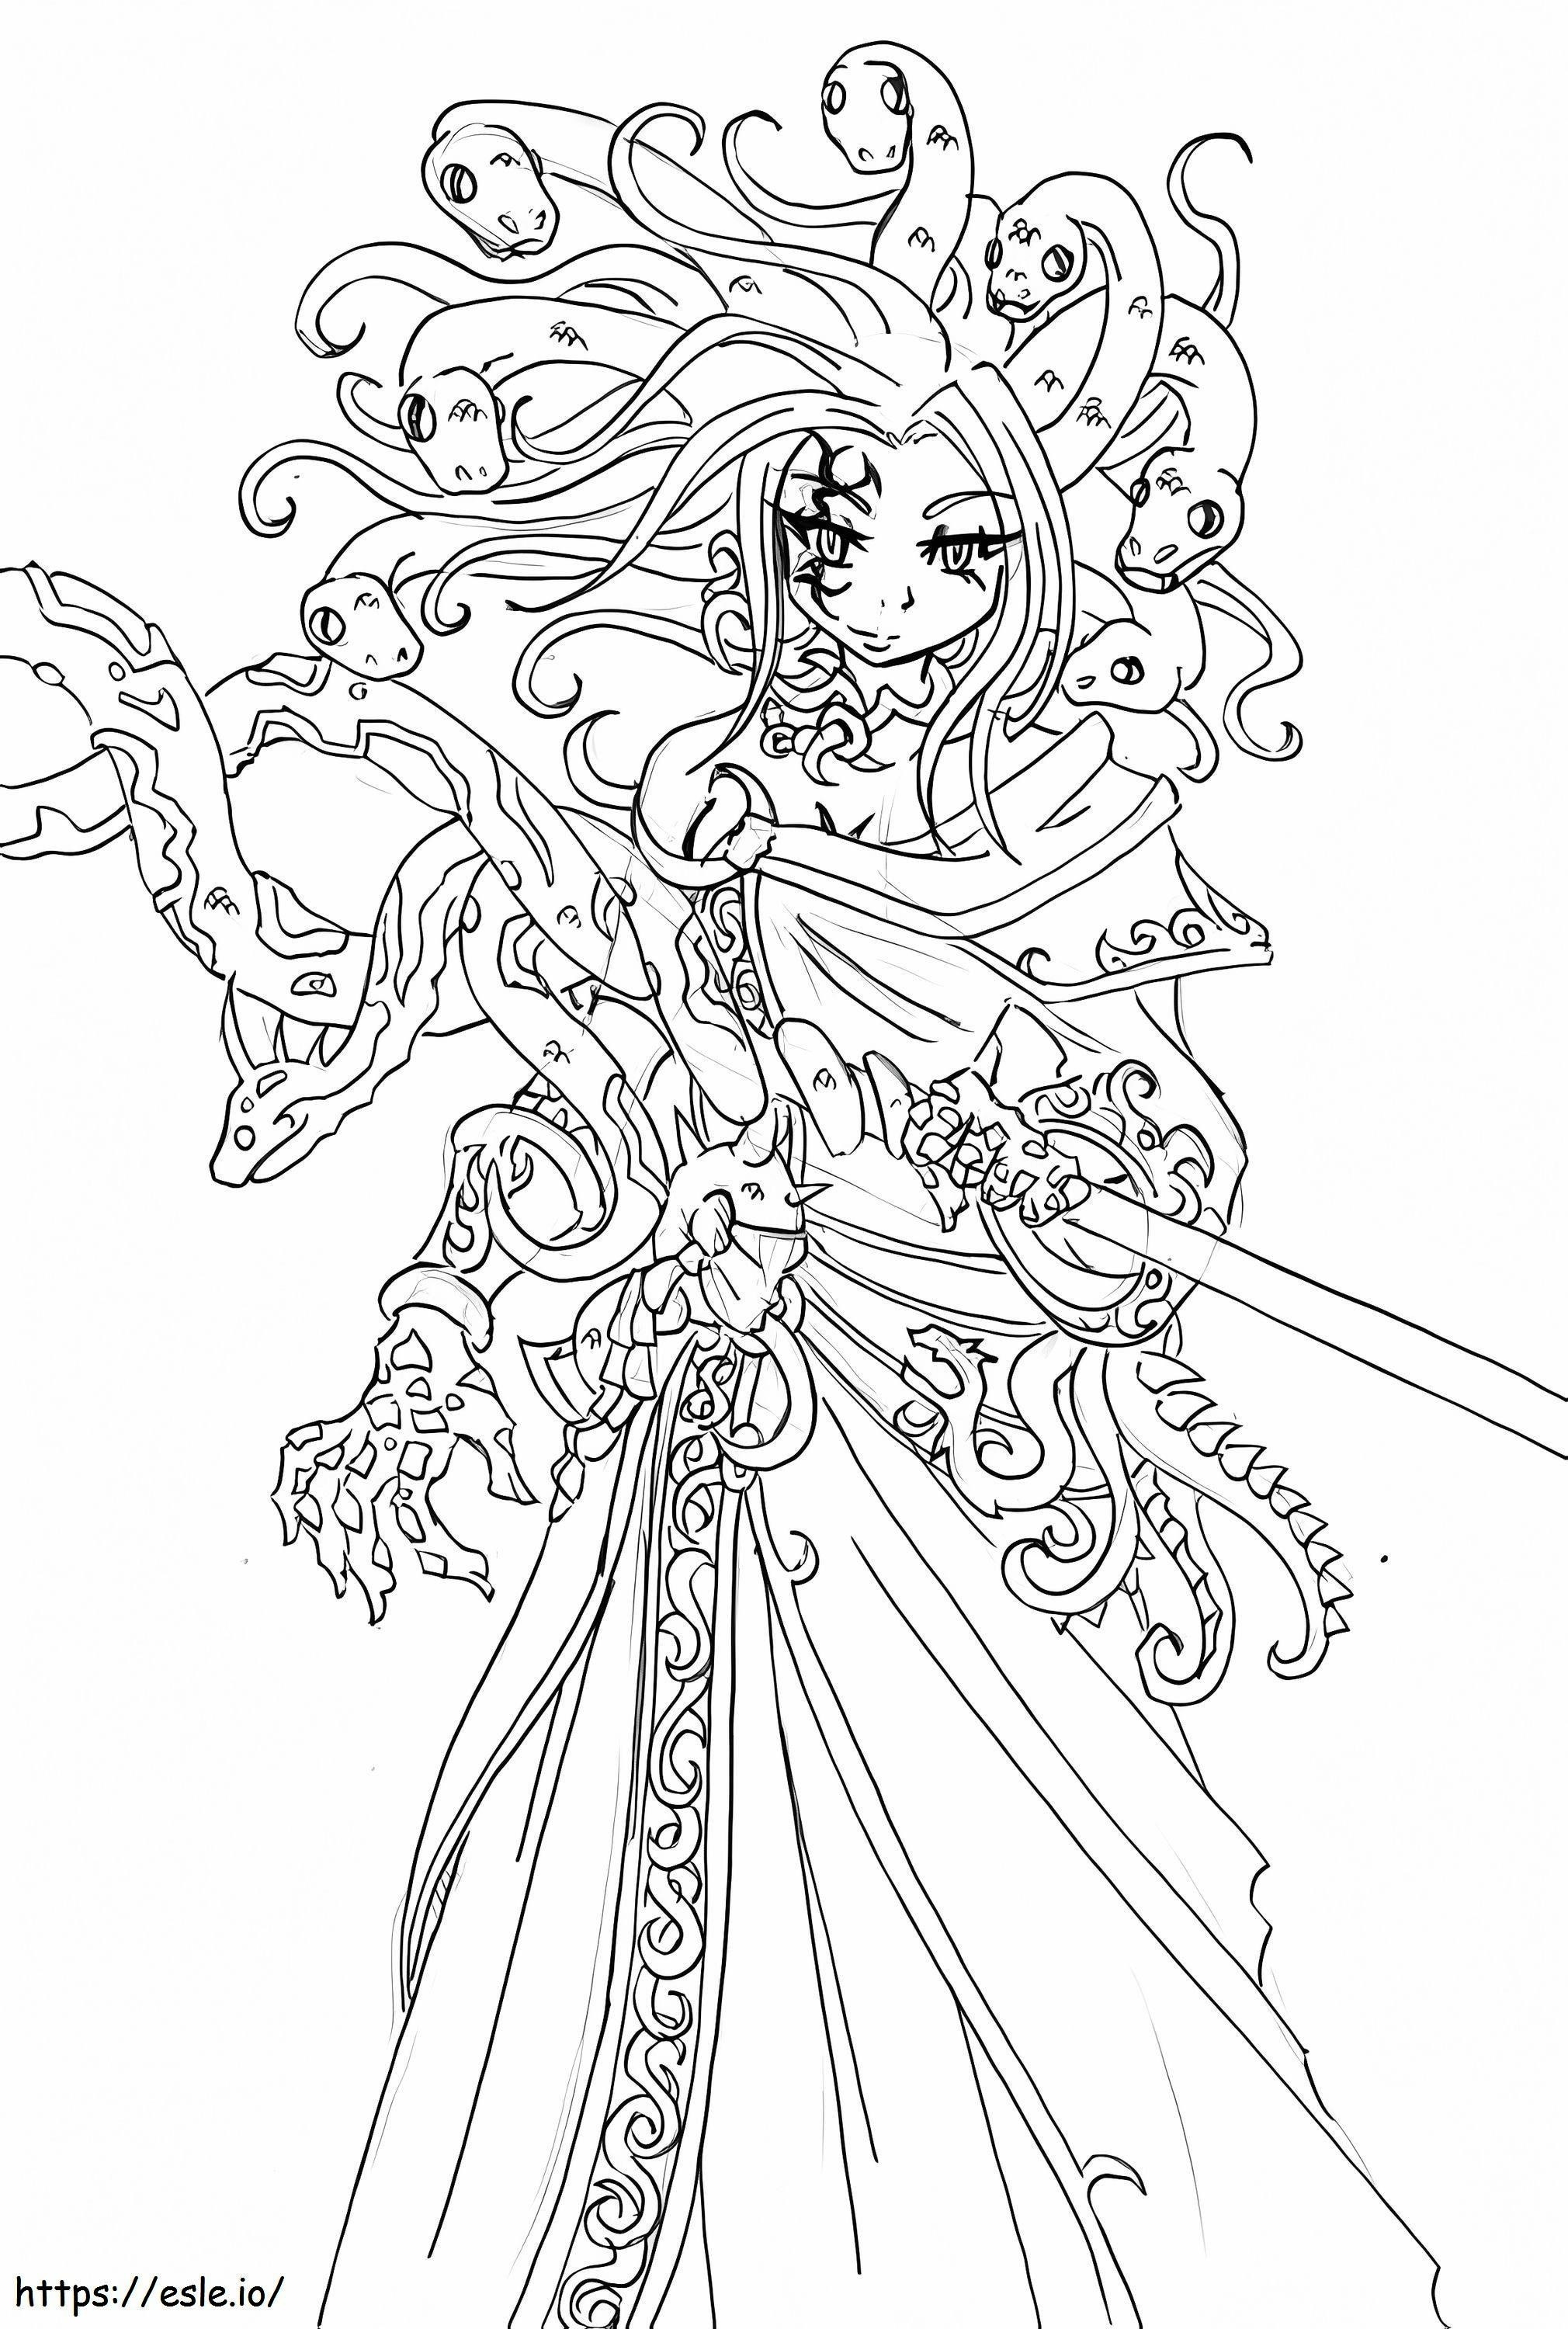 Amazing Medusa coloring page